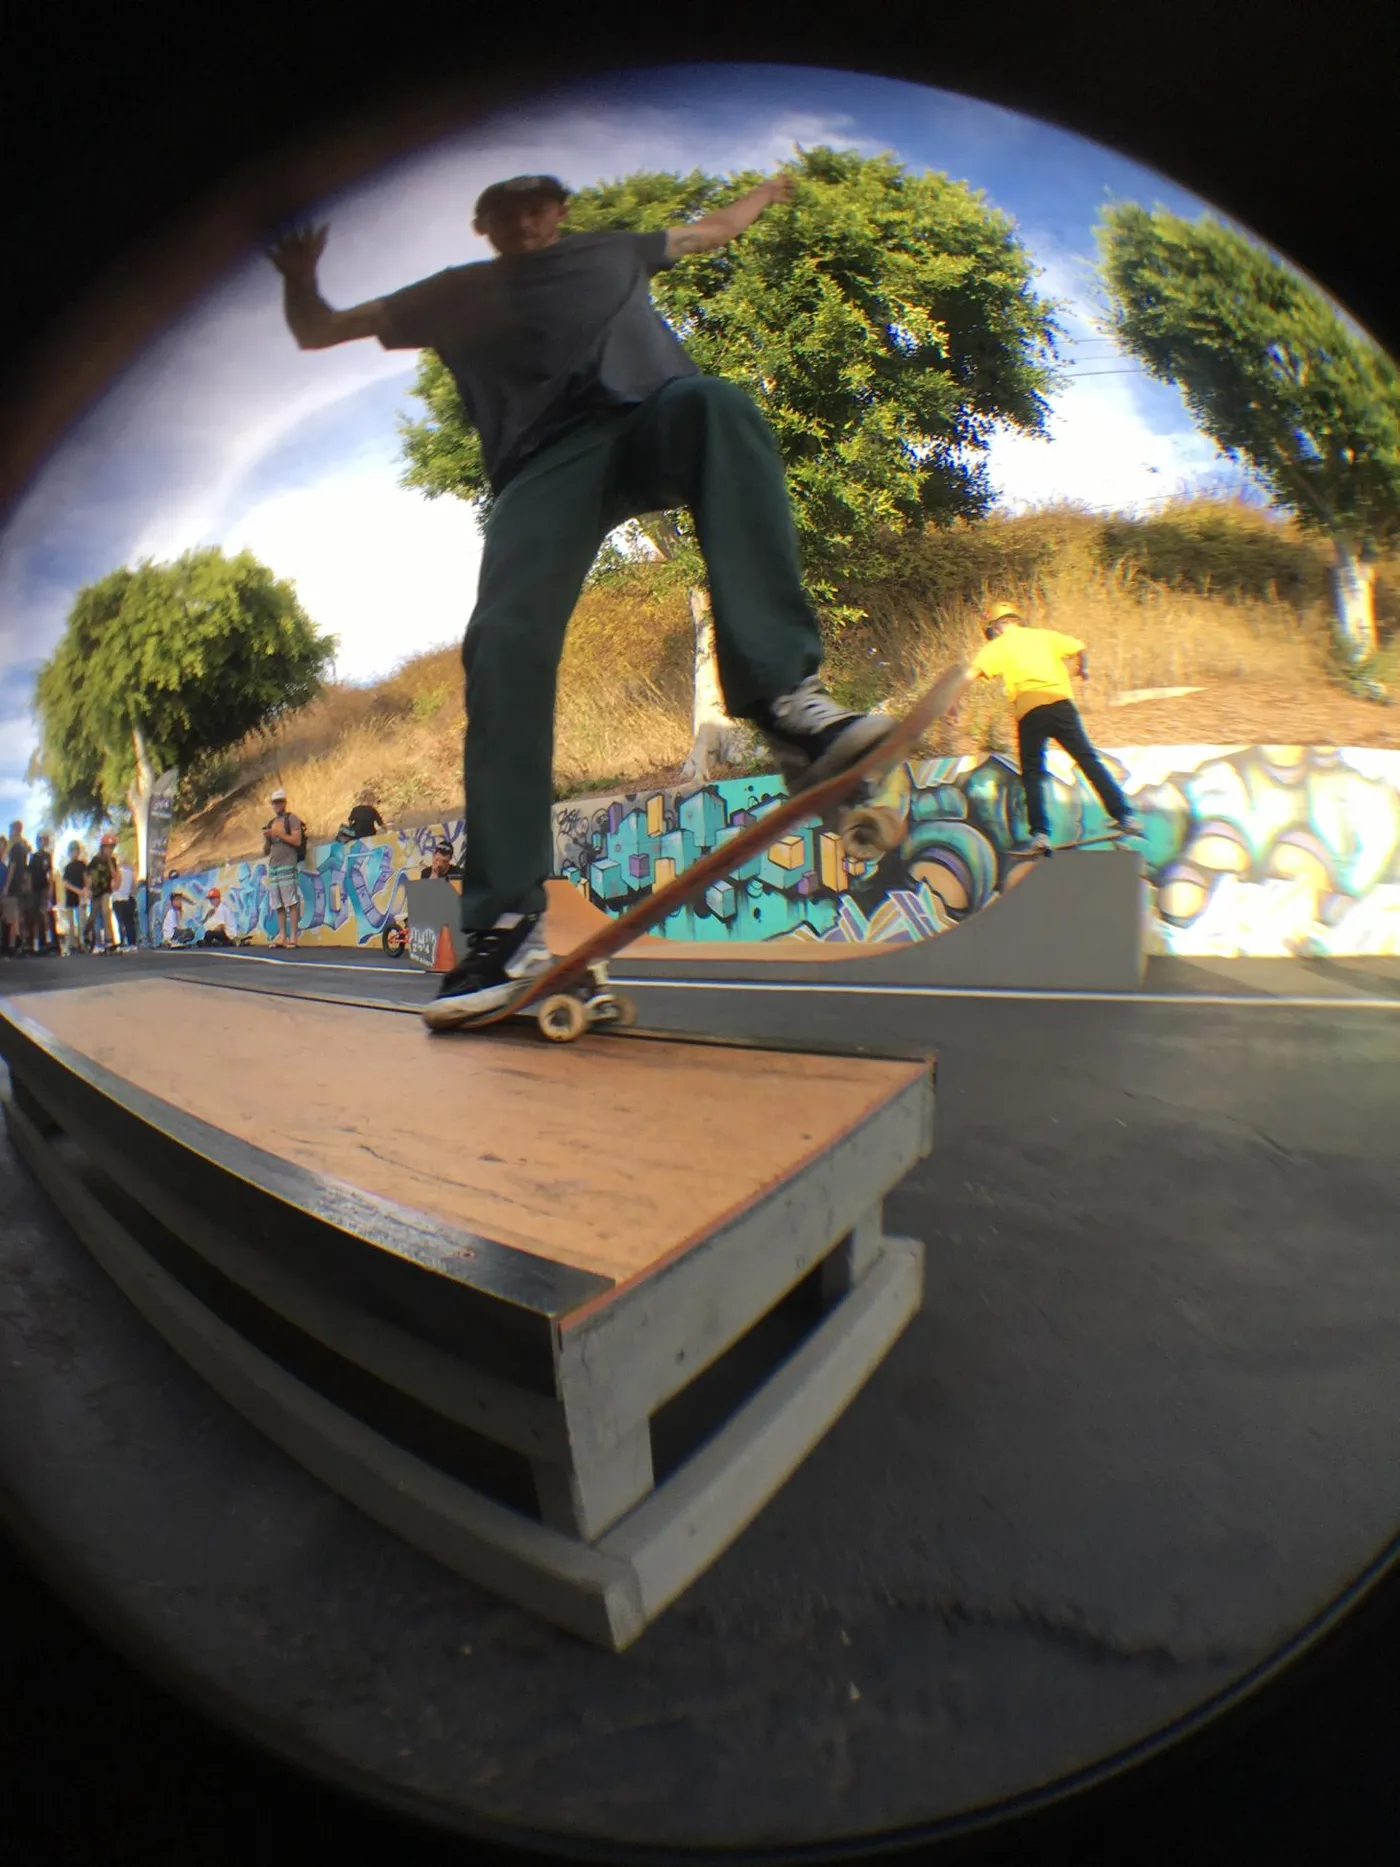 One foot high grind box with skater doing a 5-0 grind on it